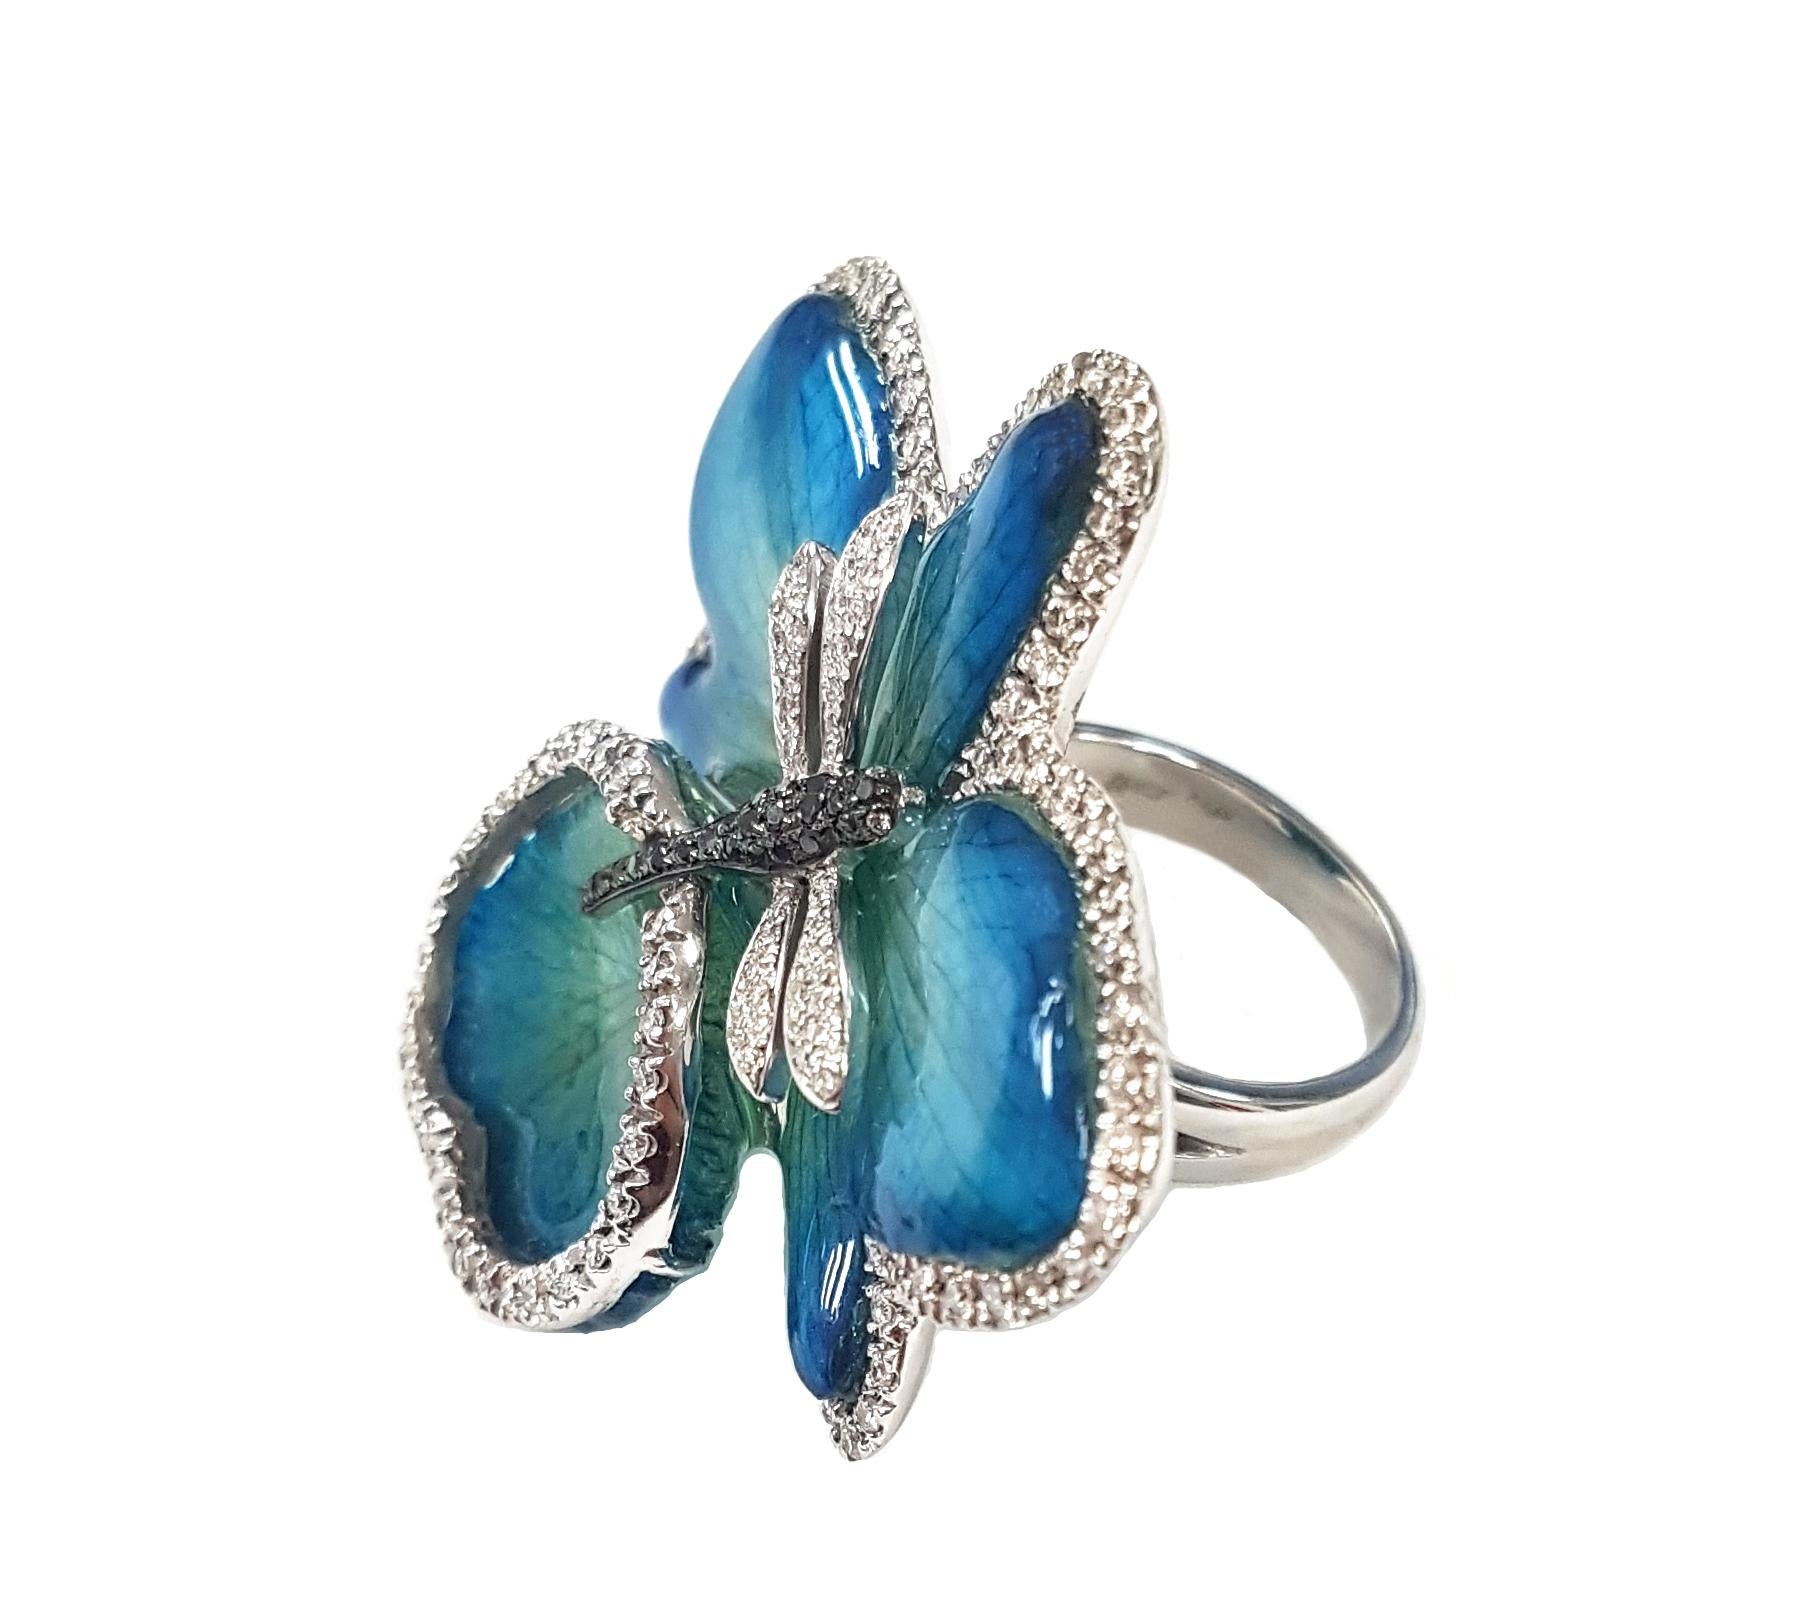 A stunning floral cocktail ring masterfully created entirely by hand from 925 silver and featuring the entire bloom of an actual orchid transformed to preserve its beauty for eternity. Each petal of the orchid is framed with an outline of brilliant